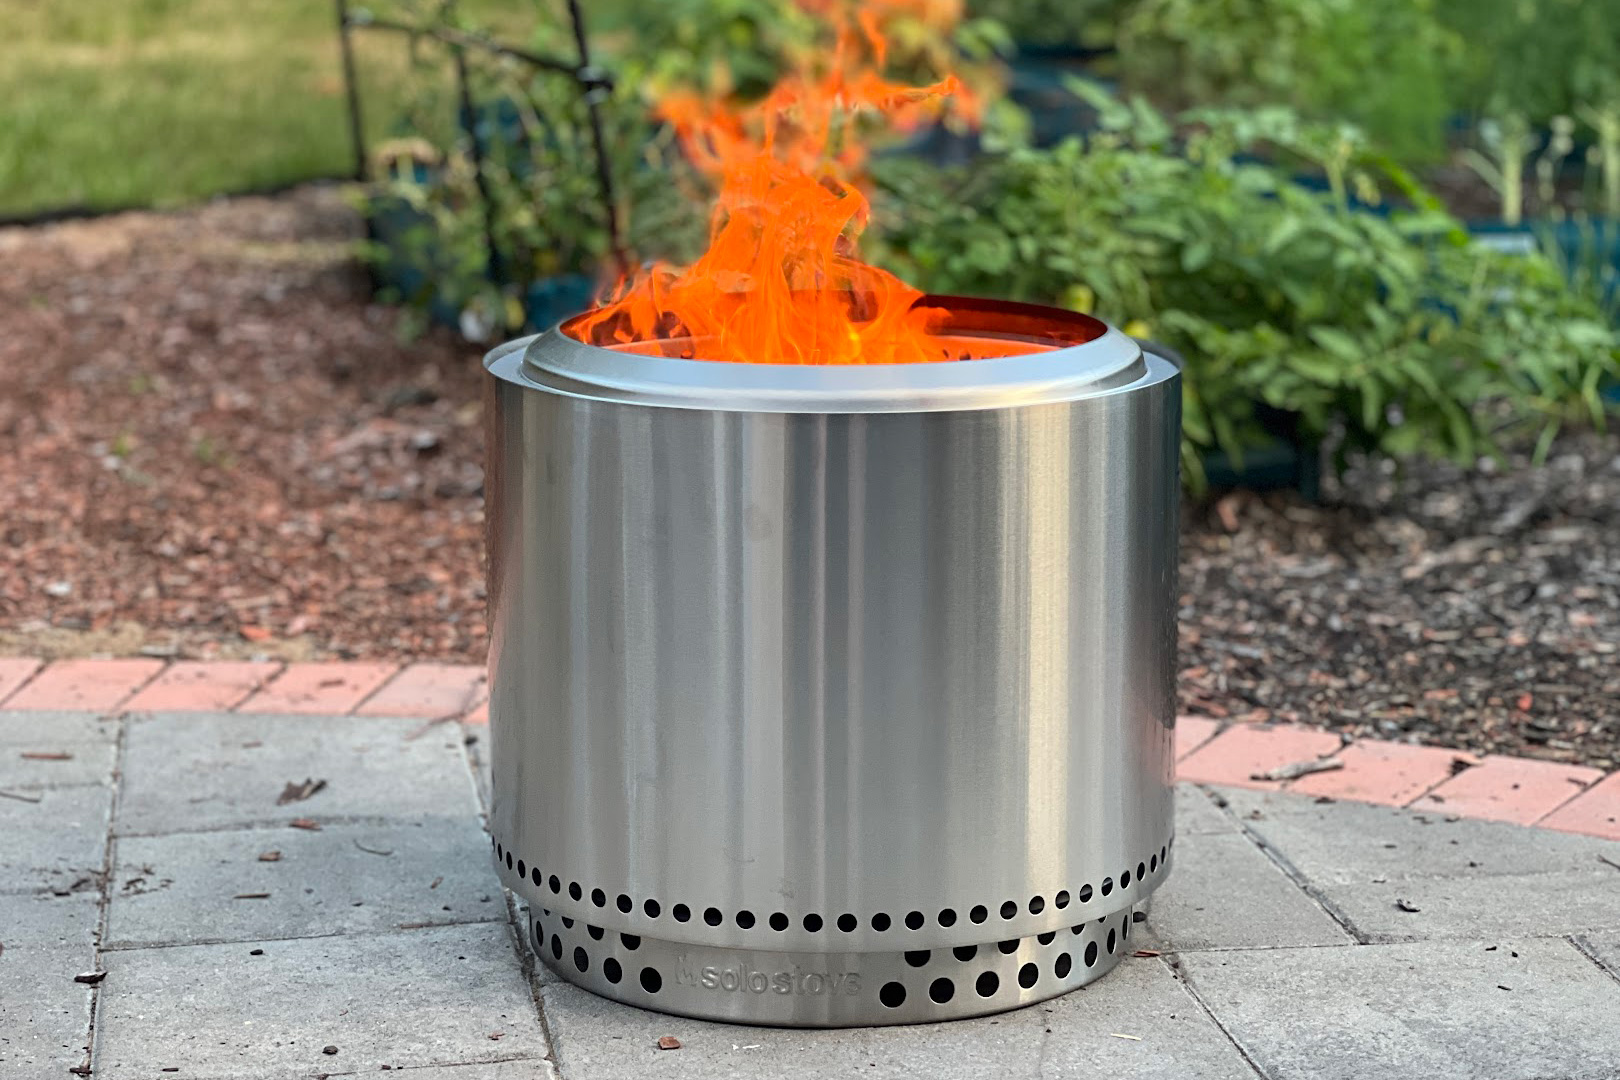 Solo Stove's most popular fire pits and accessories are up to $102 off for Prime Day